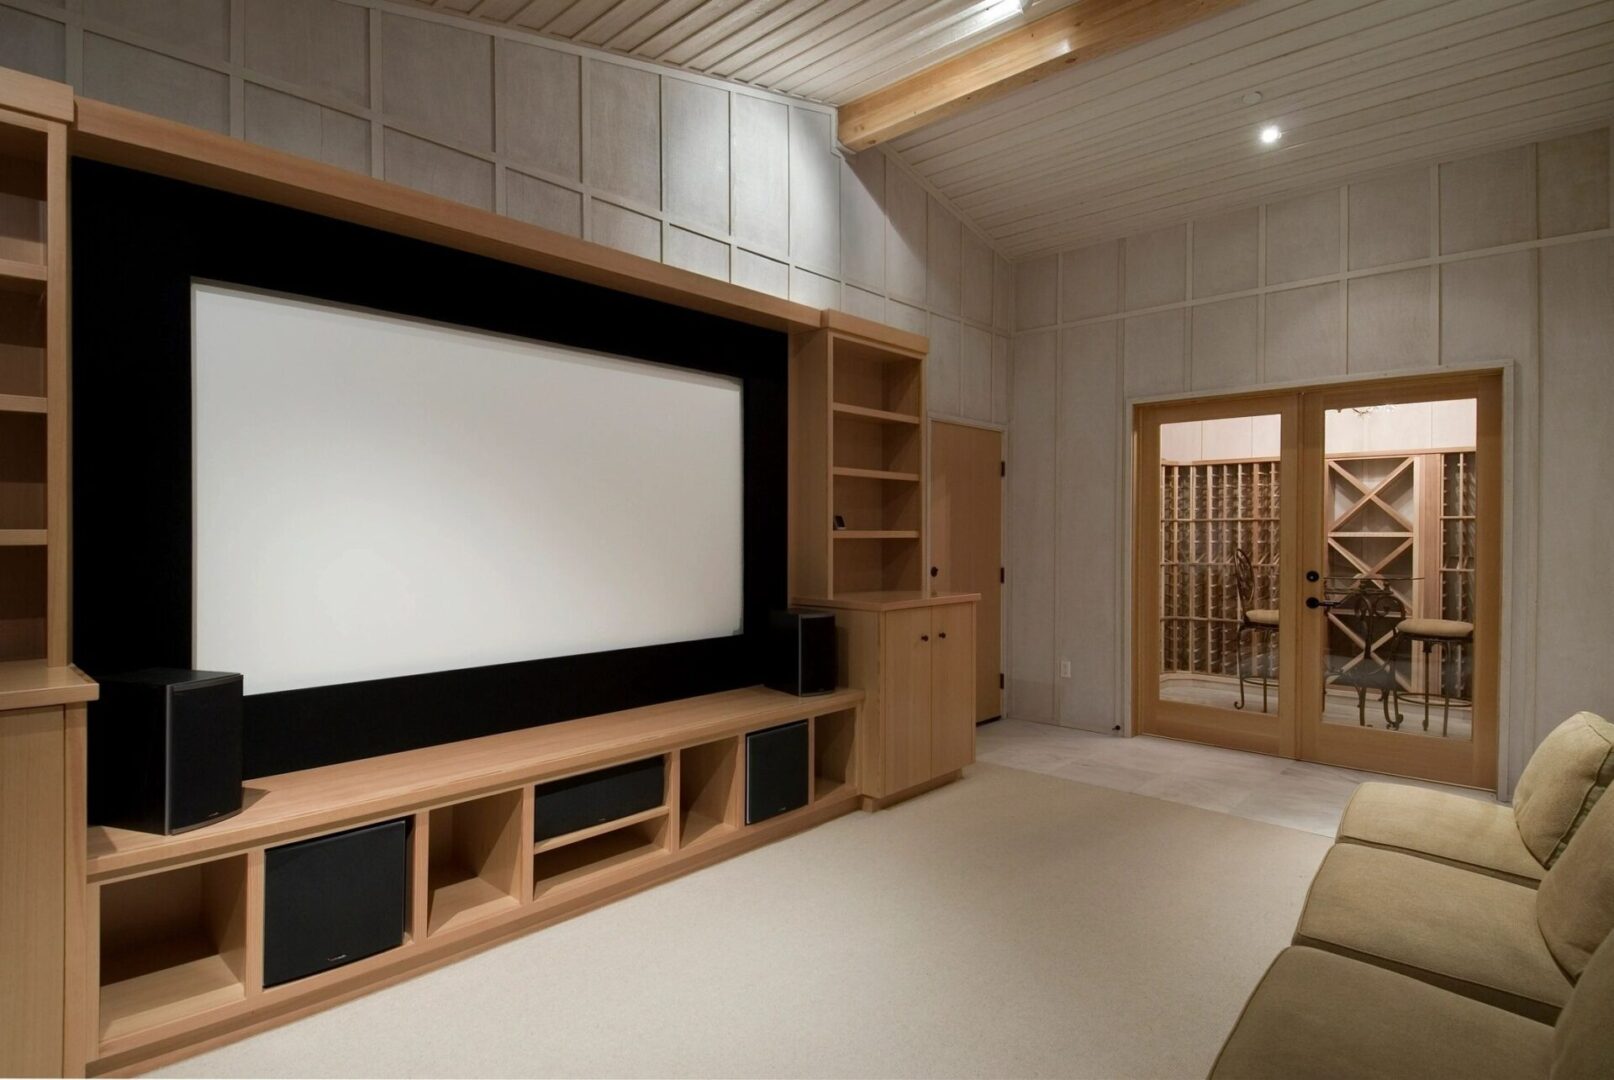 Mini home theater with wood